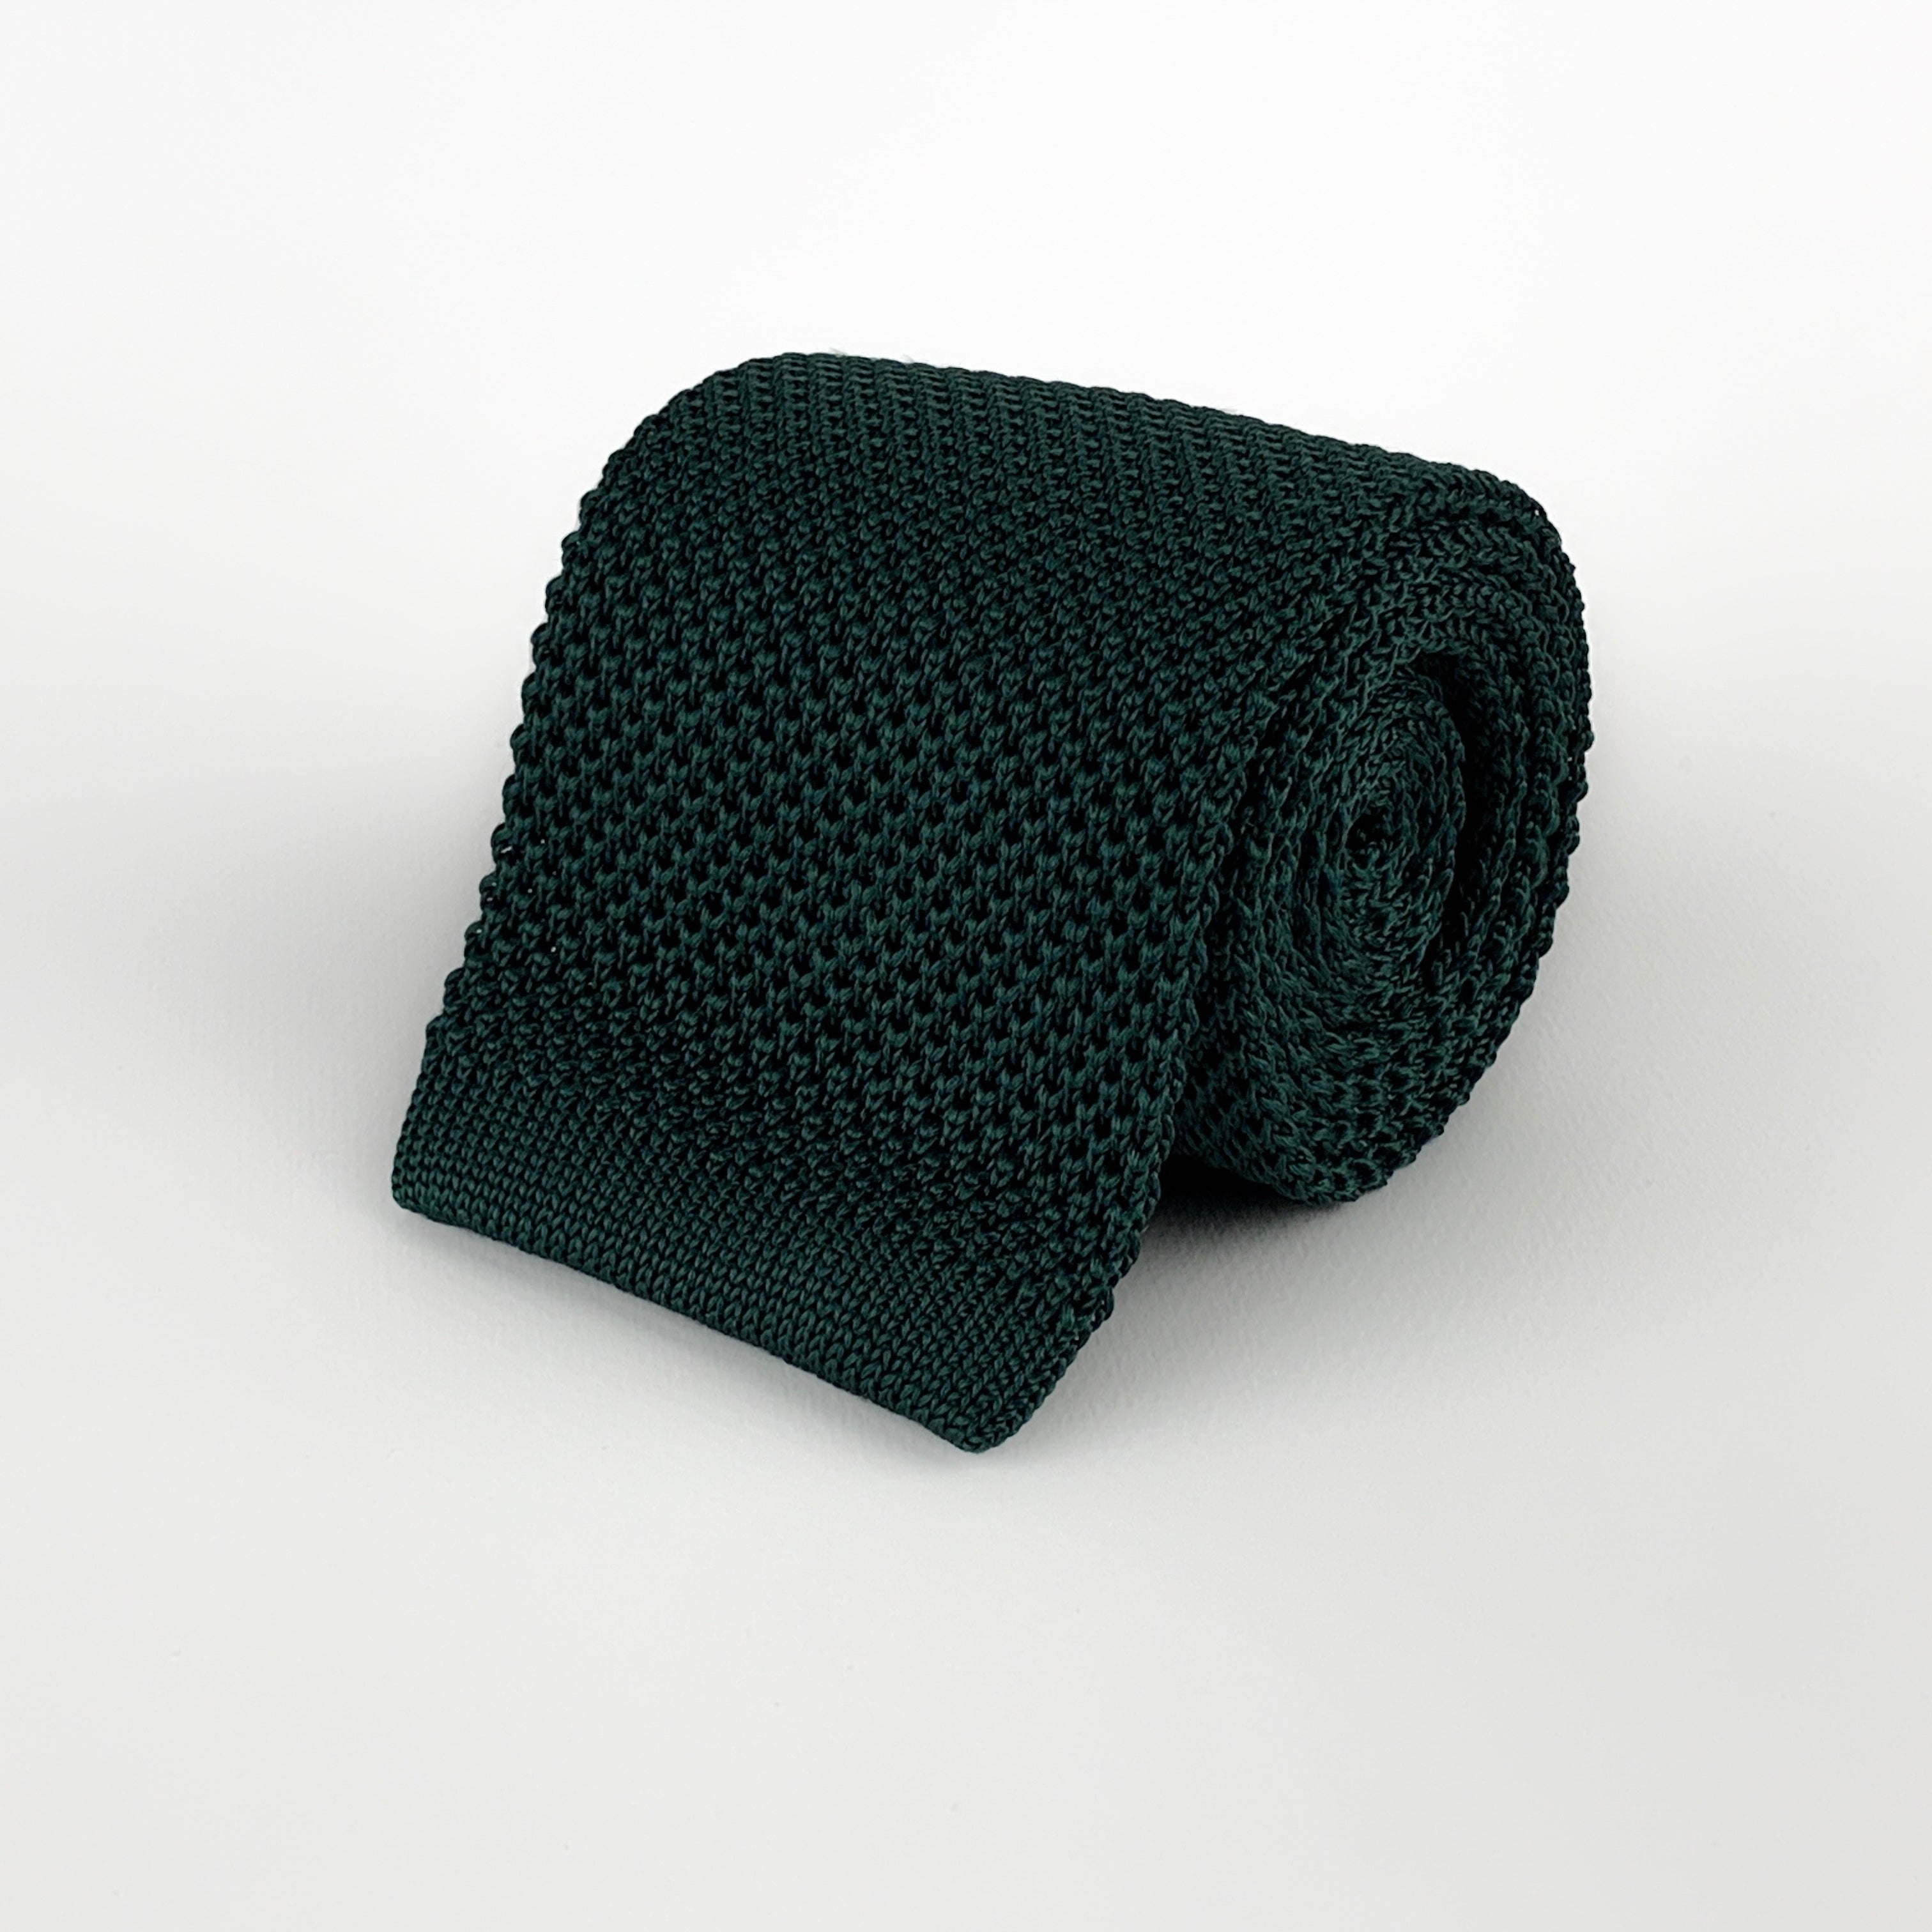 dark emerald green silk knitted tie with a square end, rolled and placed on a white background